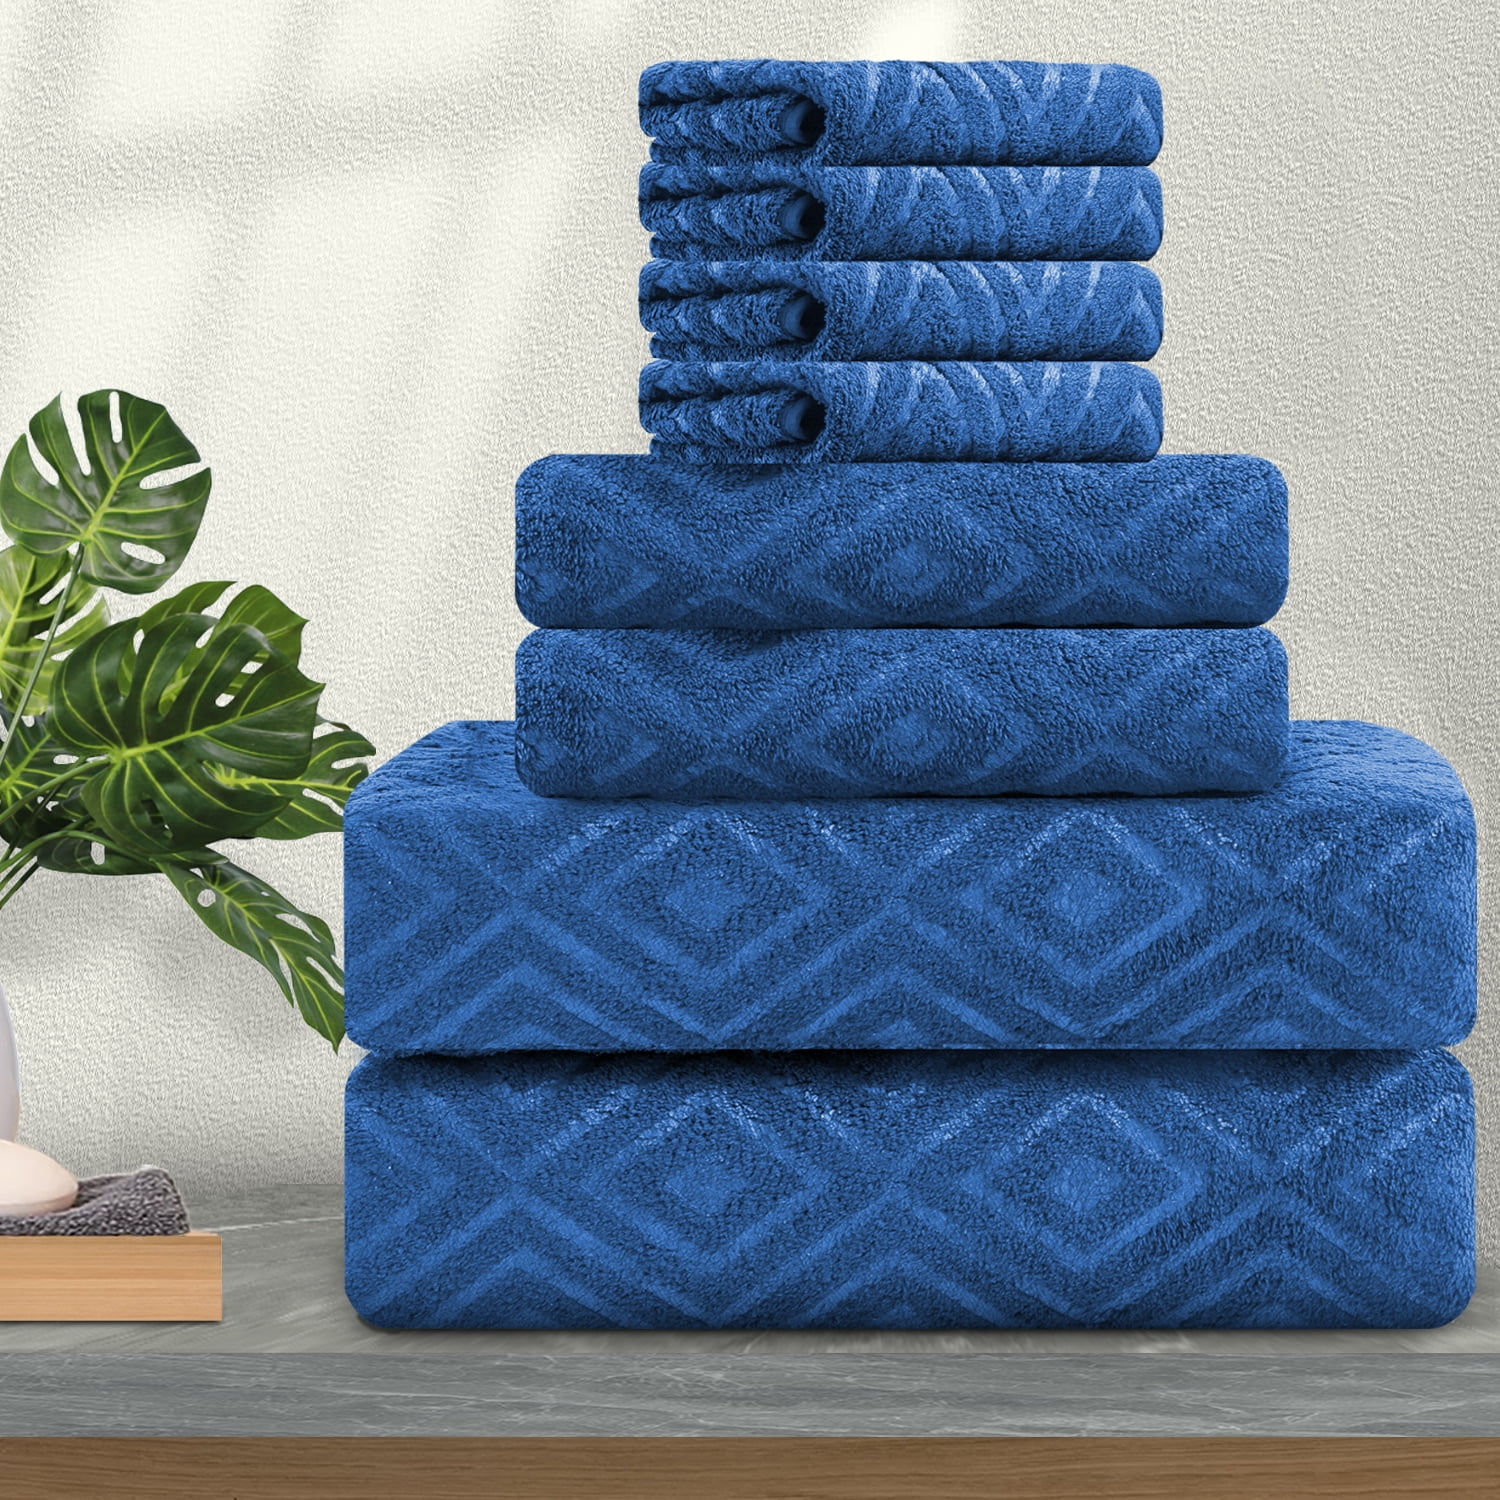 Caro Home Basketweave Towel Collection 2 pk. Hand Towels Blue Multi